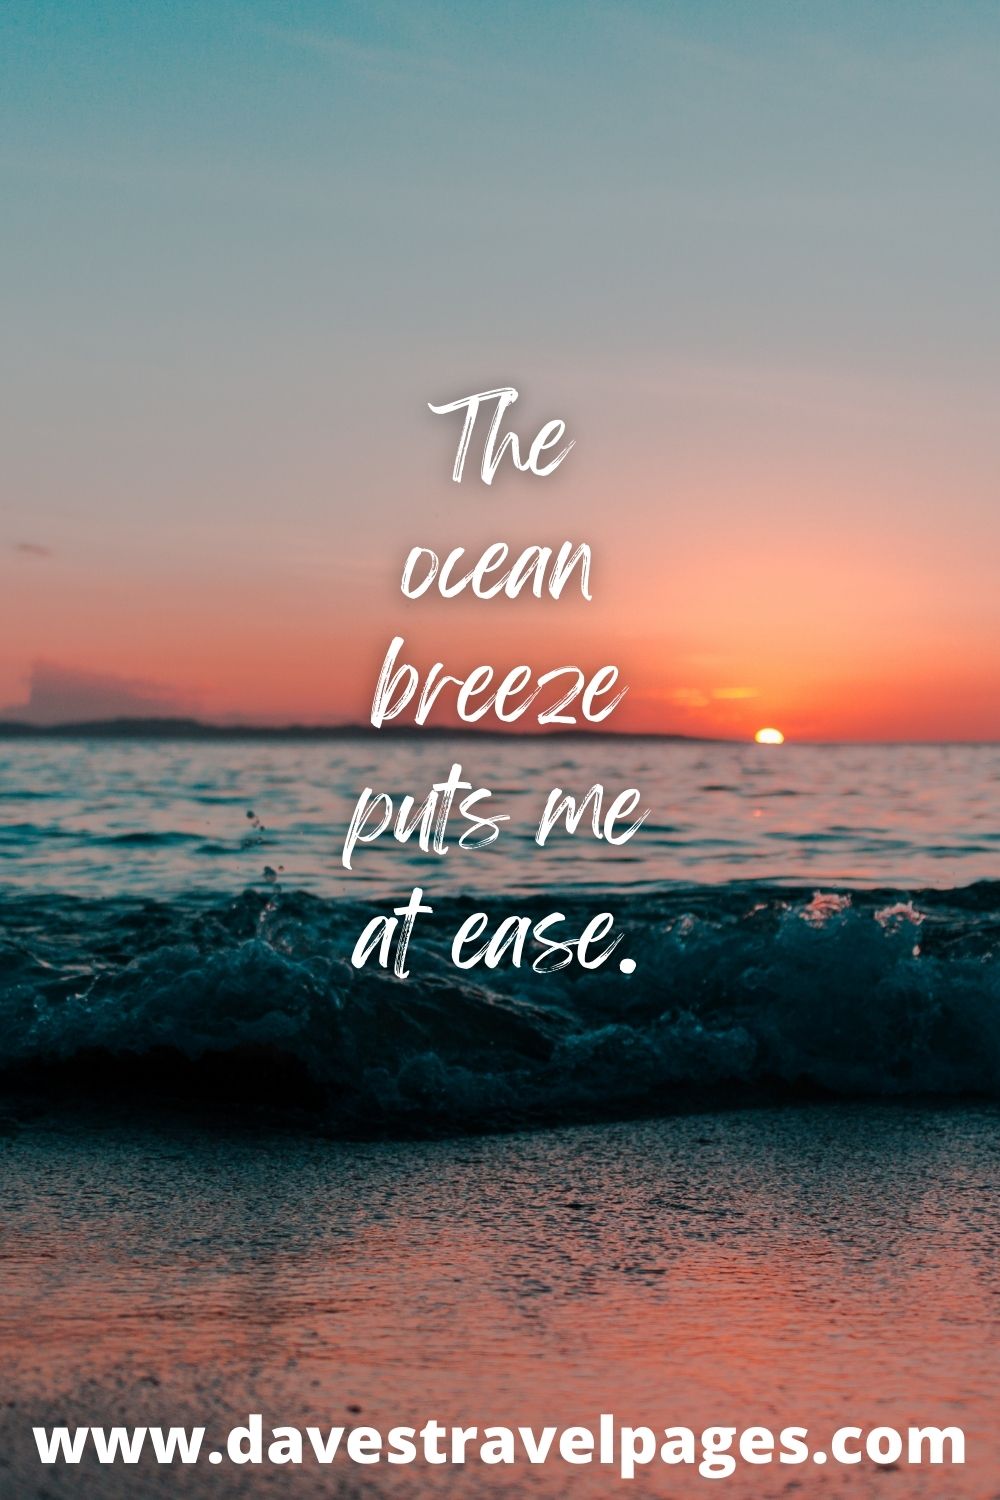 The ocean breeze puts me at ease summer caption for Instagram